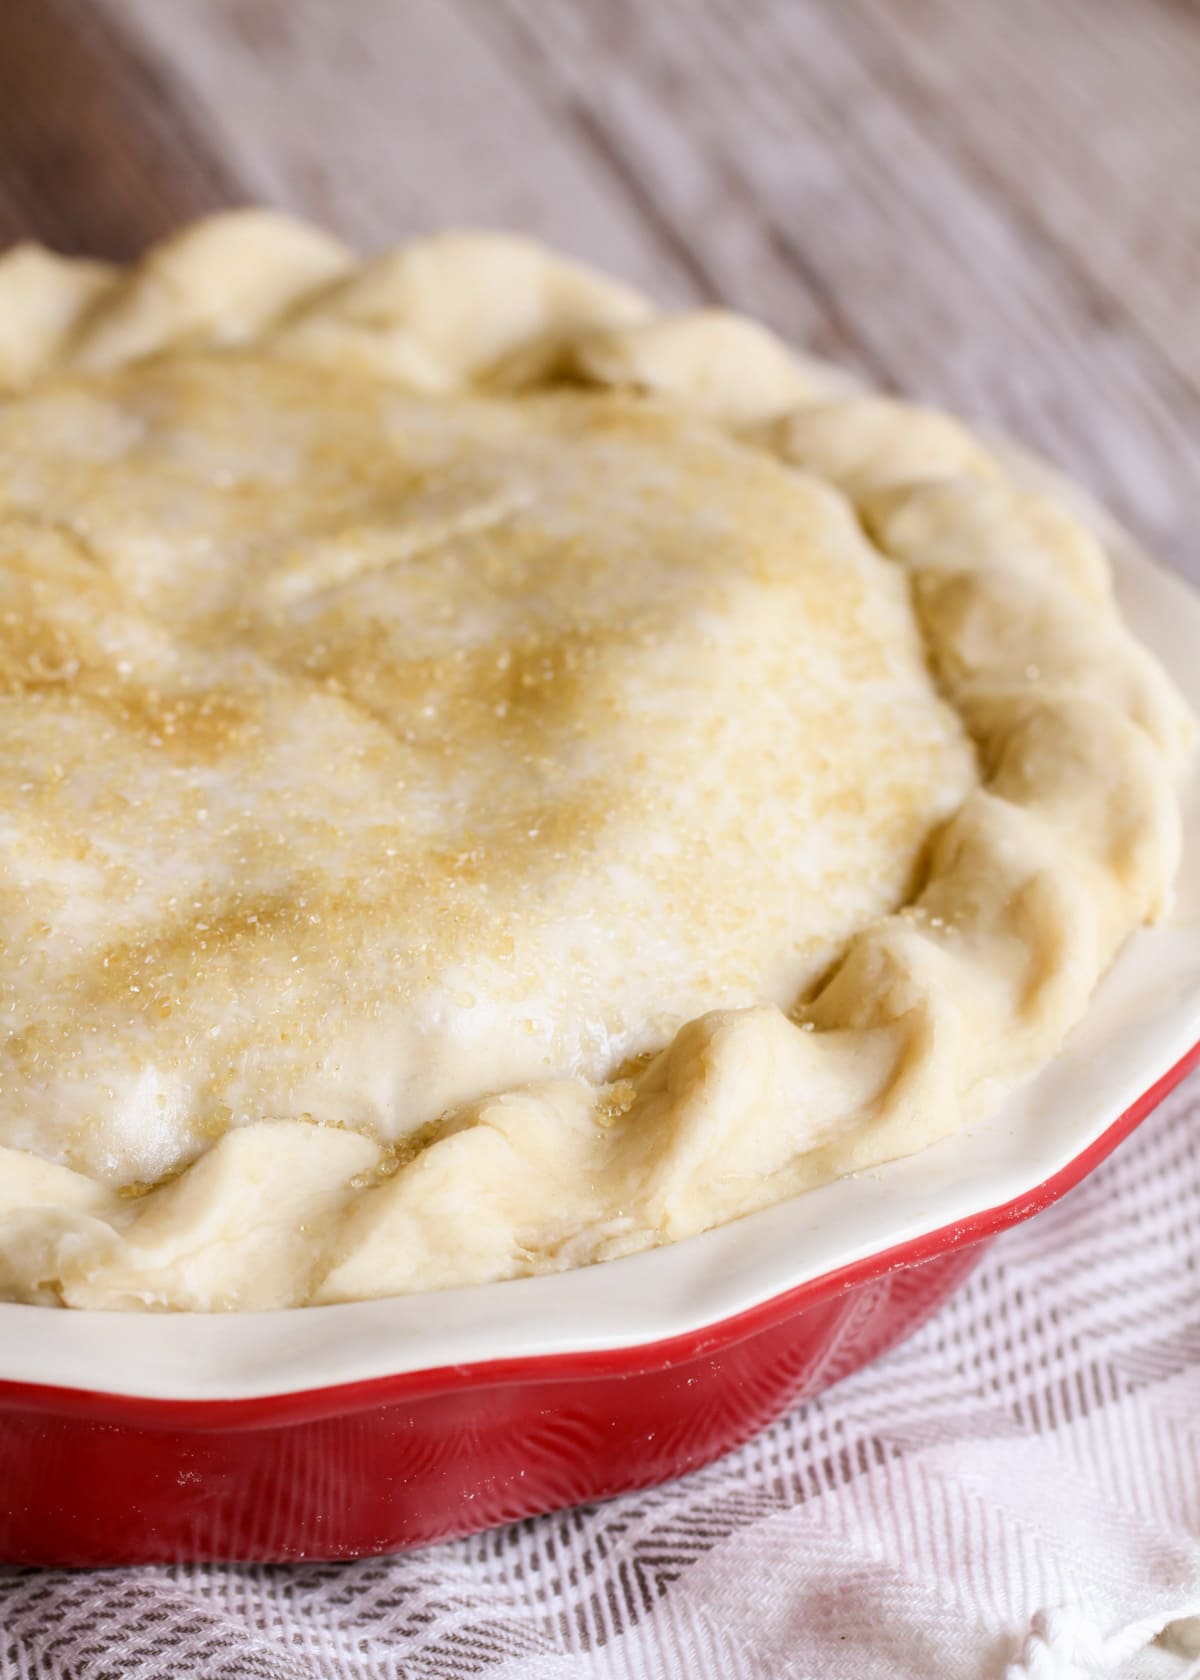 Apple pie with traditional pie crust.